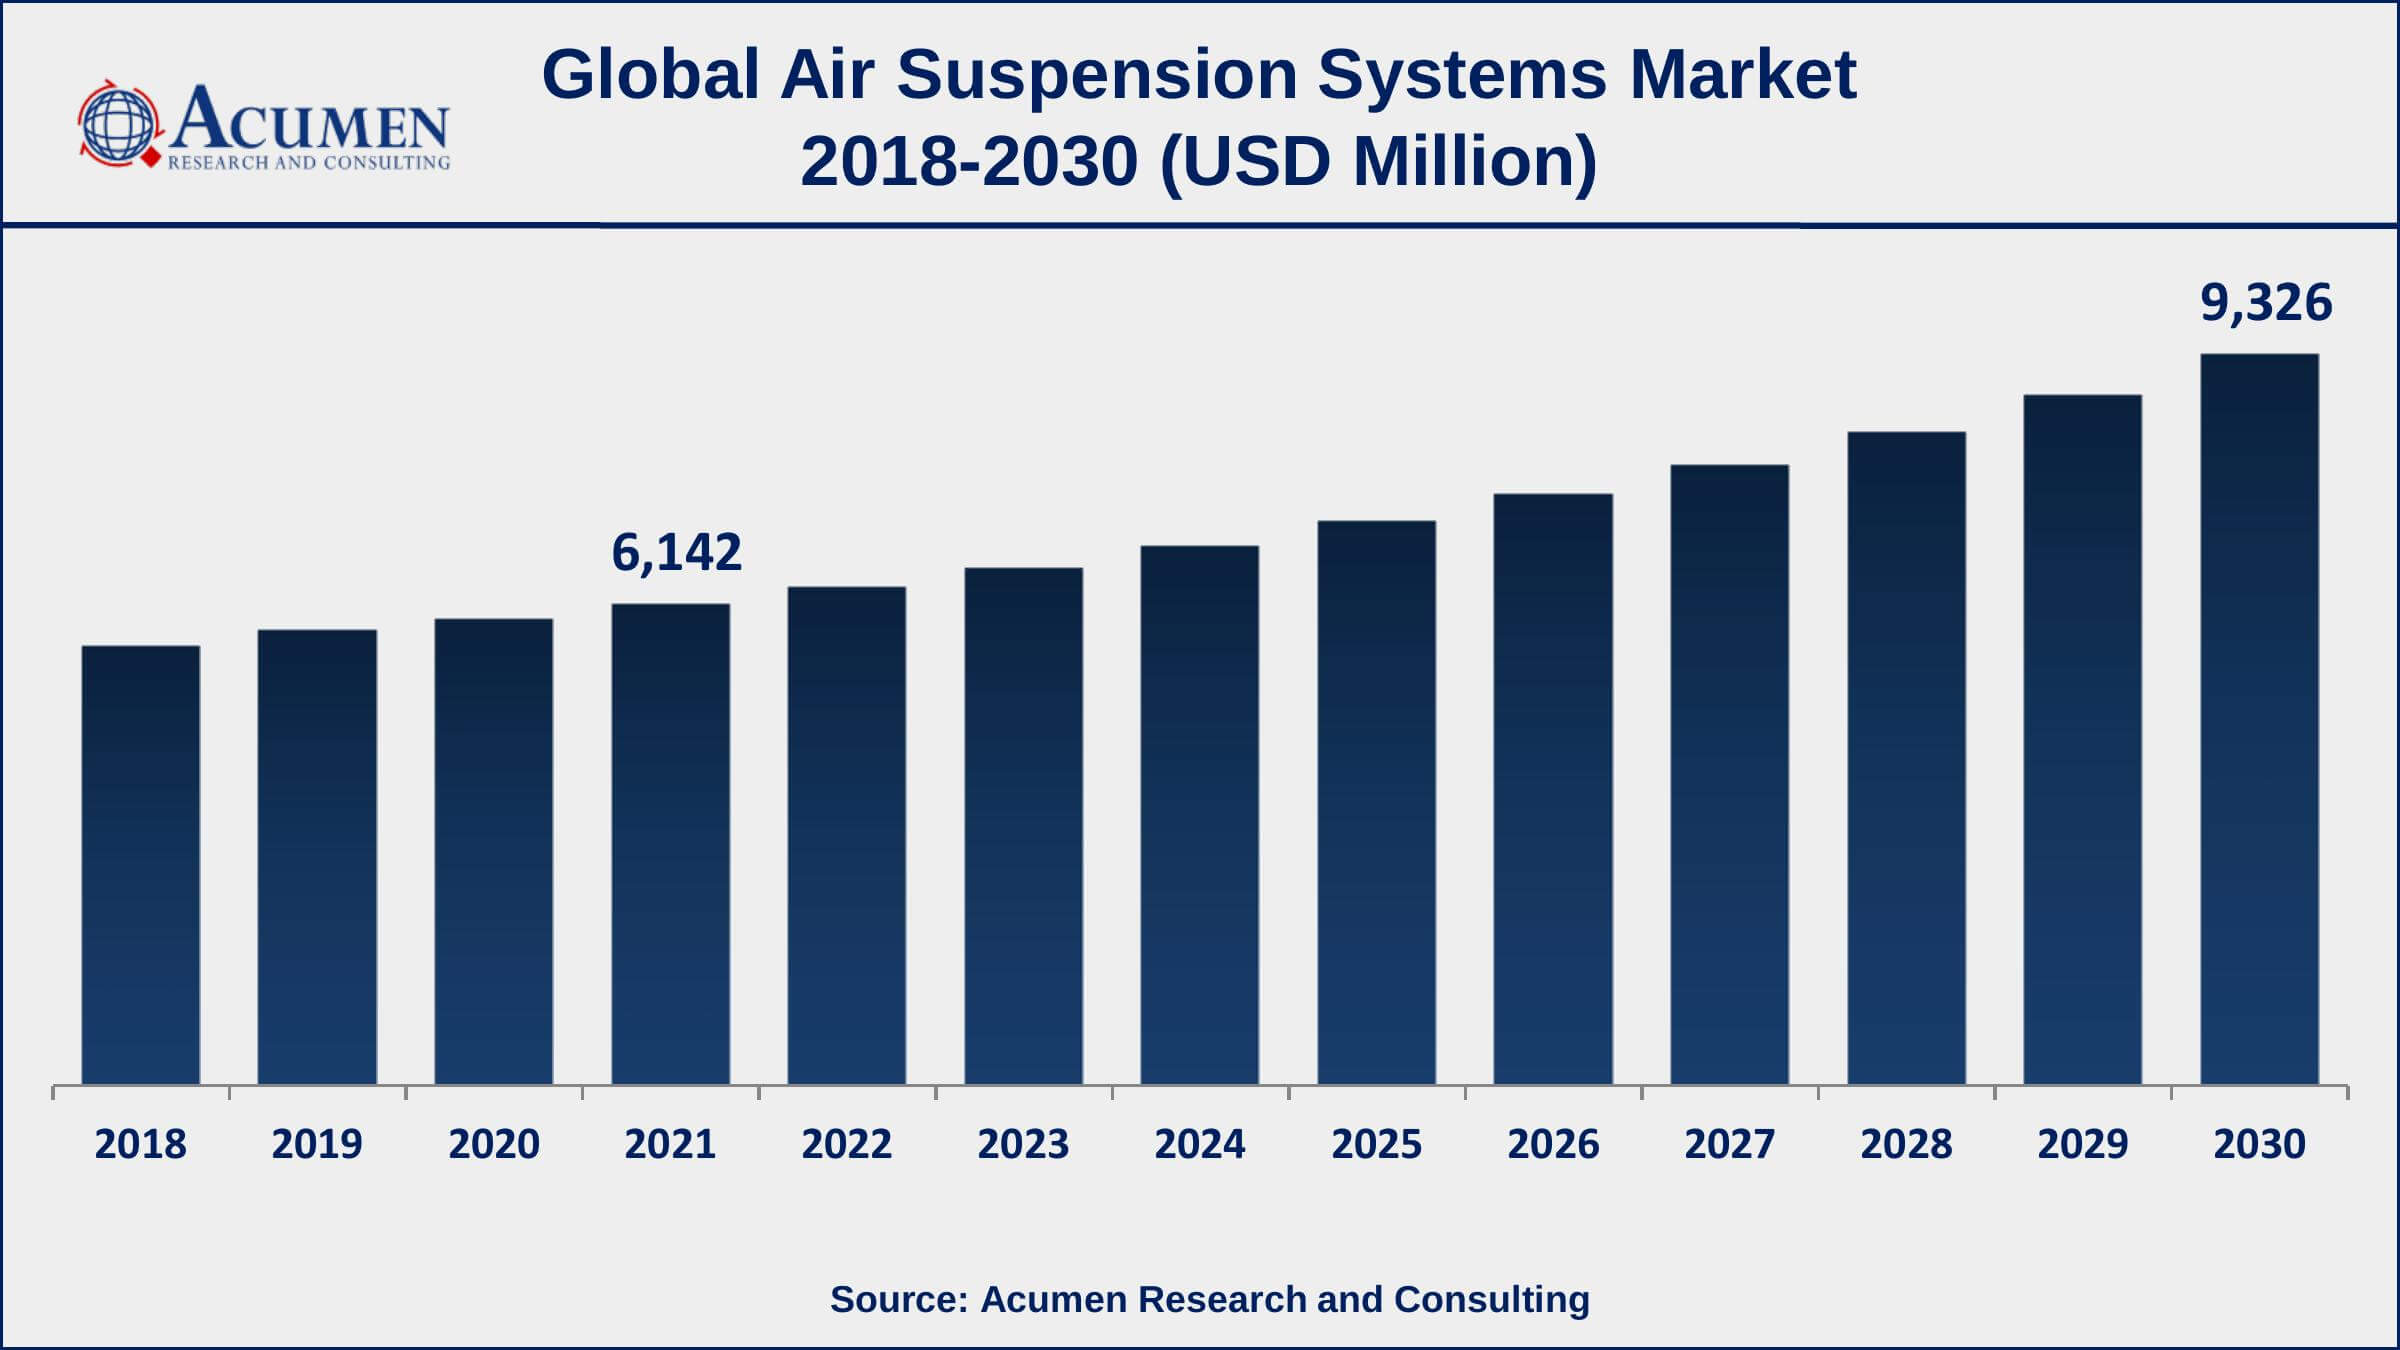 Asia-Pacific air suspension systems market growth will observe strongest CAGR from 2022 to 2030